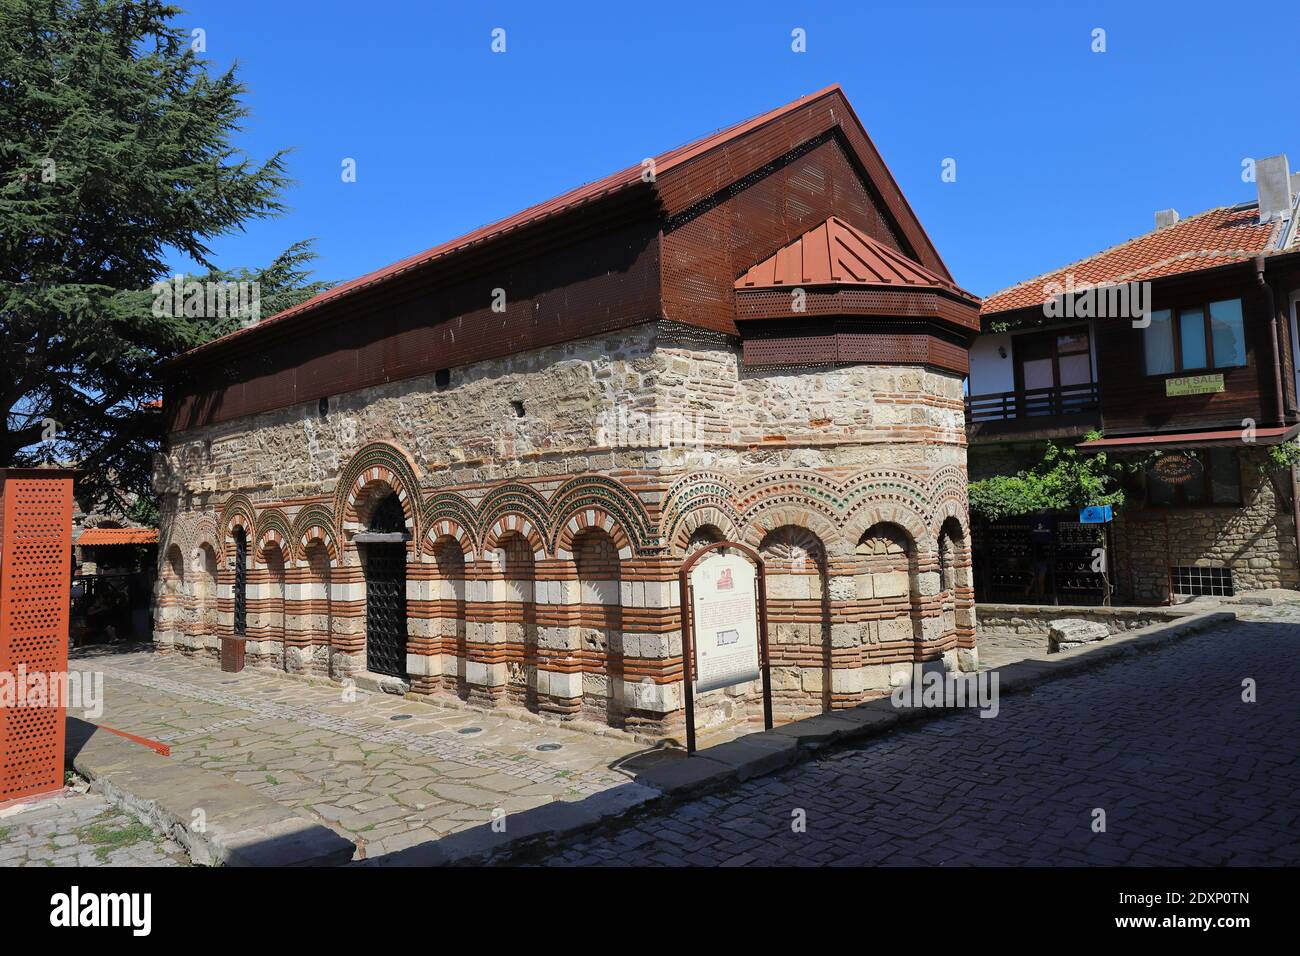 BULGARIA, BURGAS PROVINCE, NESSEBAR - AUGUST 05, 2019: The south wall with the entrance of the Church of Saint Paraskevi in Nessebar Stock Photo